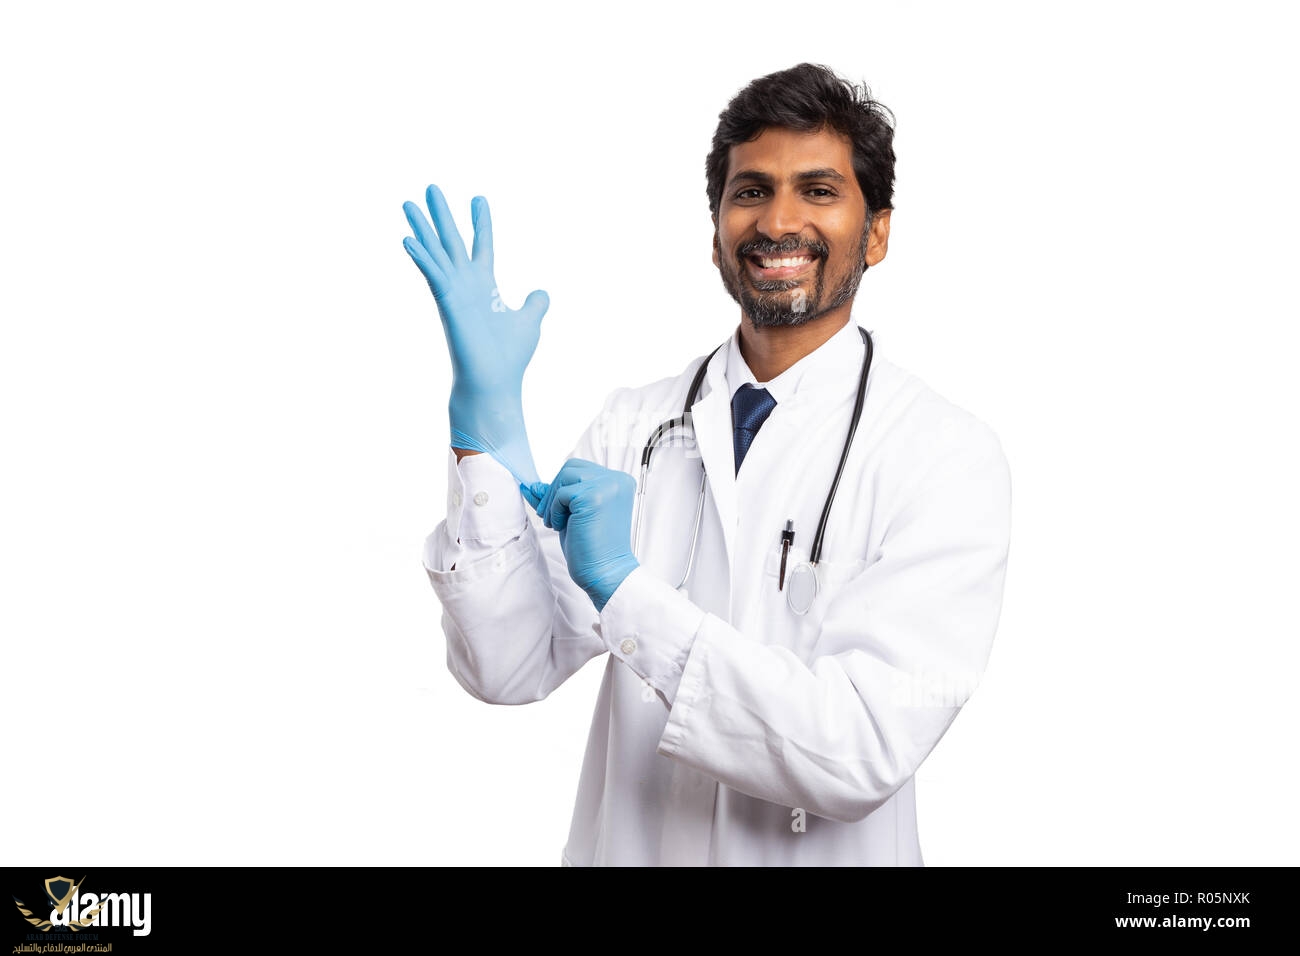 trustworthy-indian-medic-man-putting-on-blue-surgical-latex-glove-with-smile-as-hygiene-concep...jpg